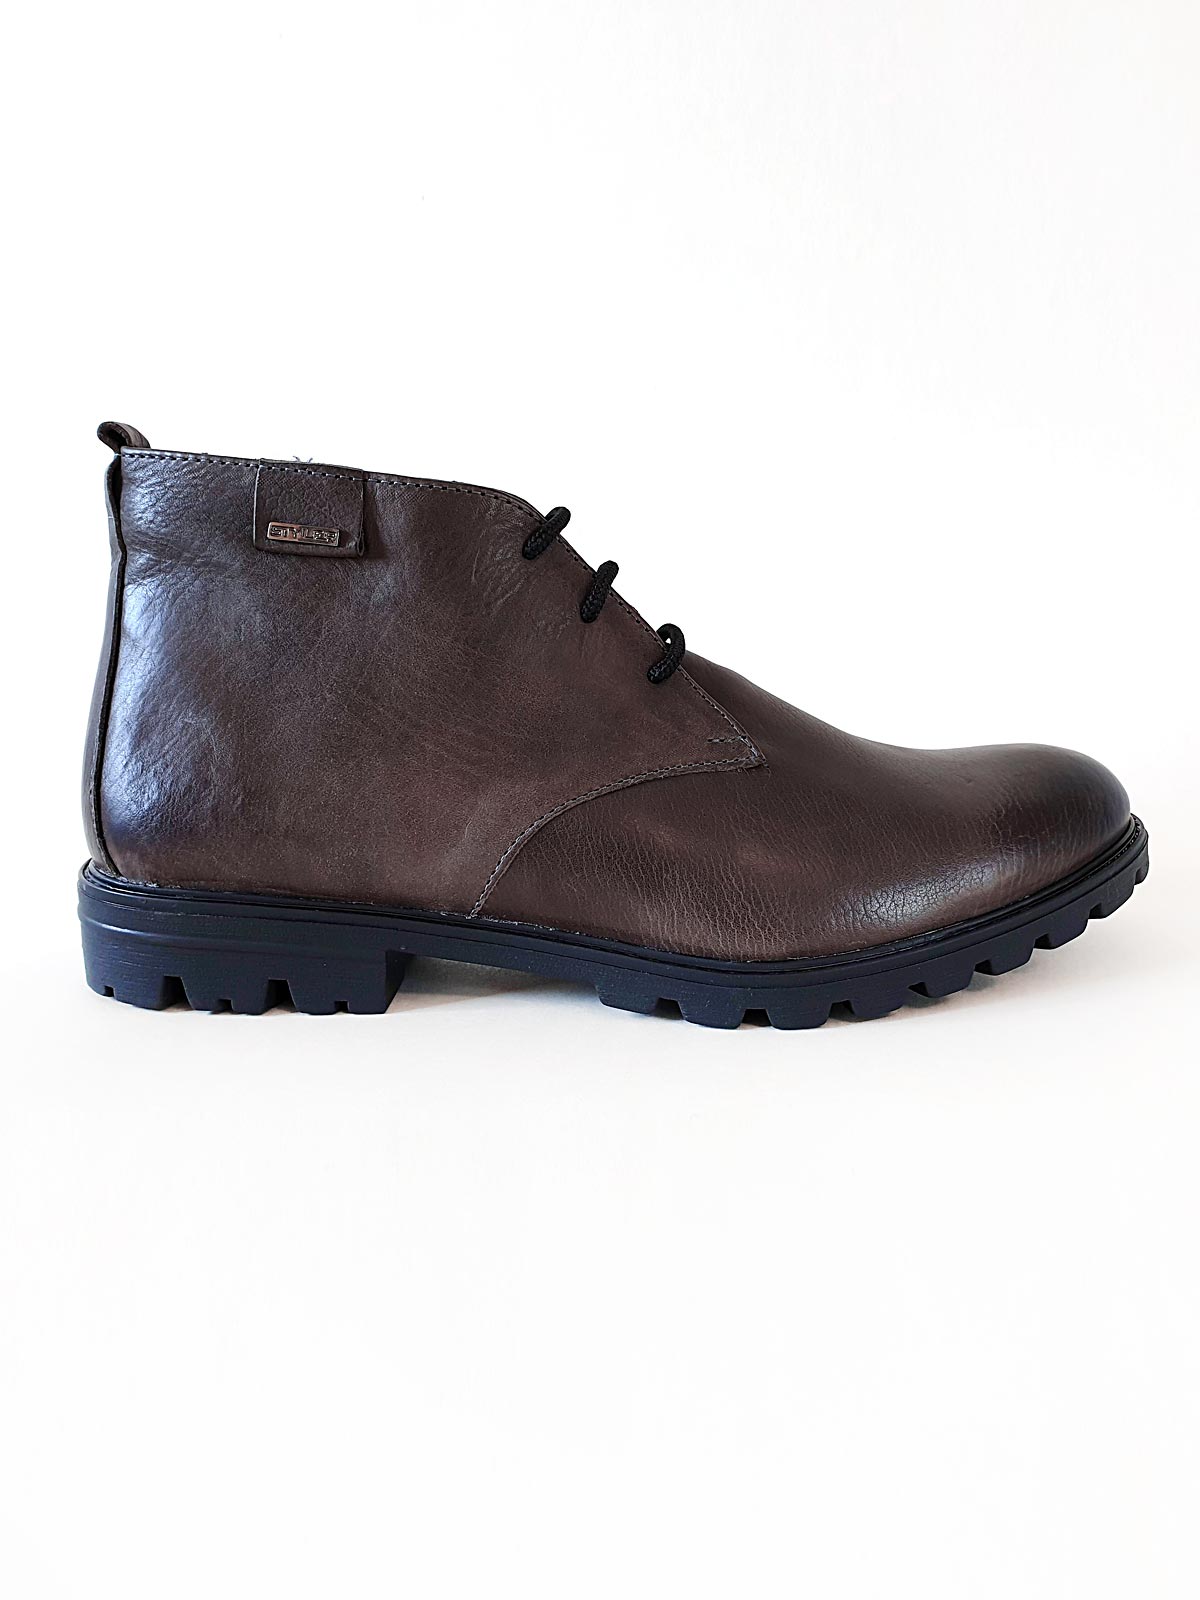 Leather high boots in browngray - 81068 - € 41.62 img2